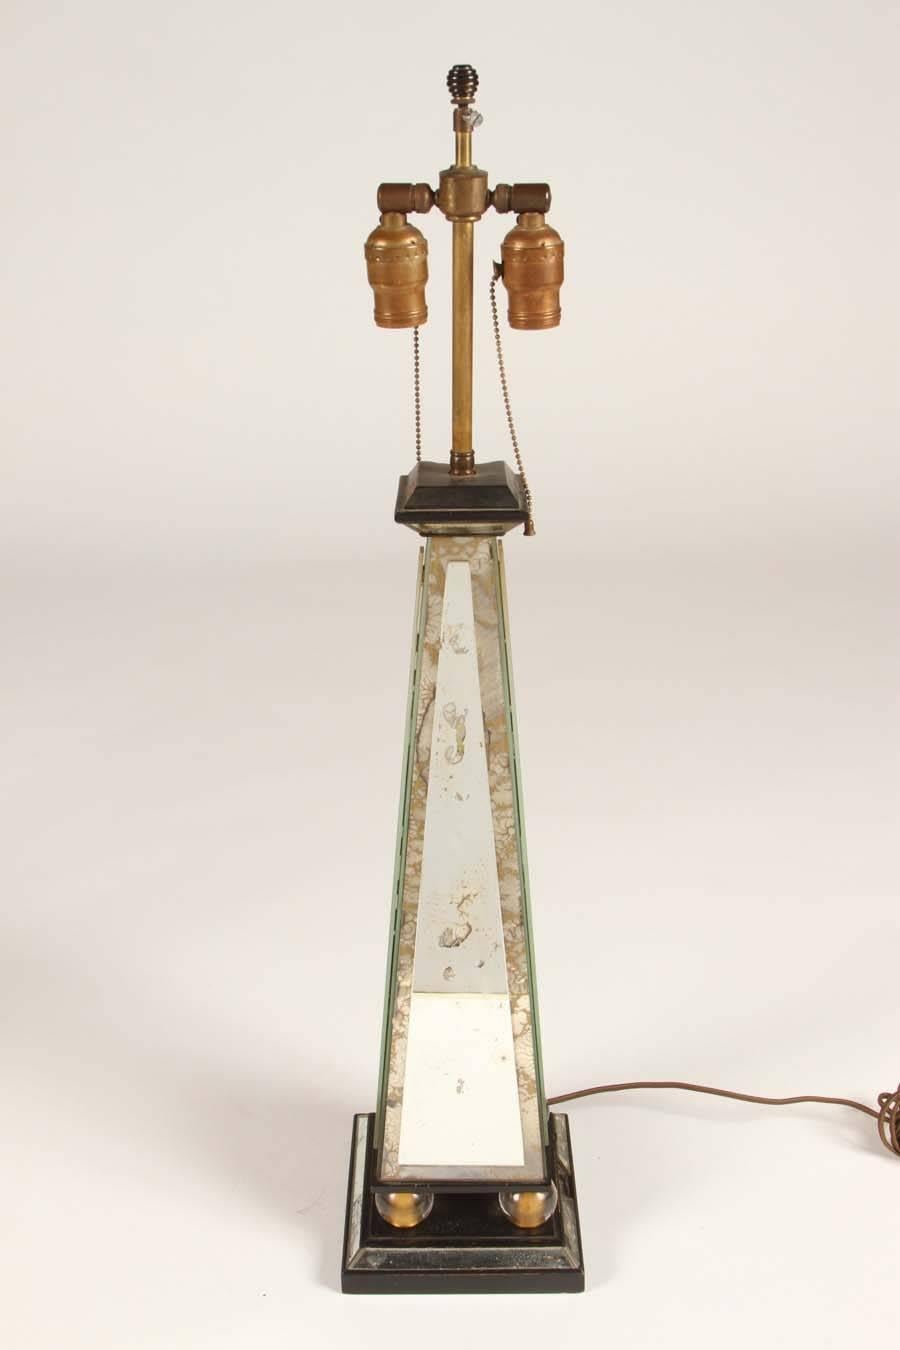 20th Century Pair of Mirrored Obelisk Form Table Lamps For Sale